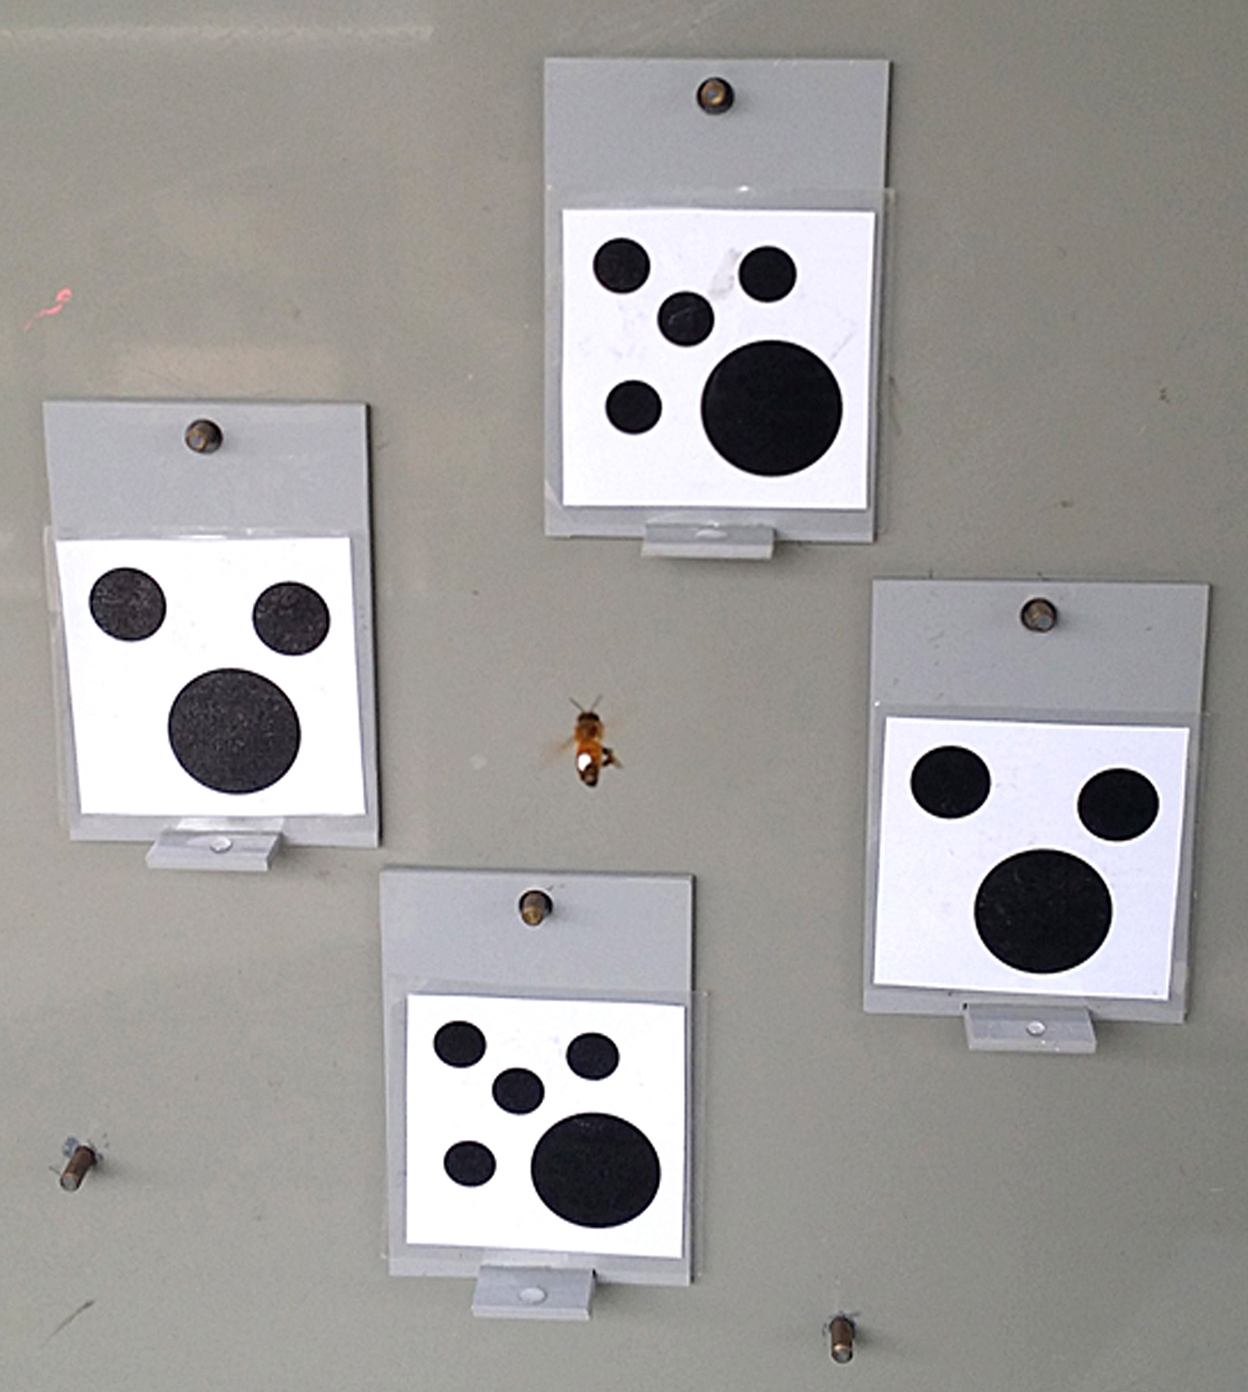 Fascinating Experiment By Australian Scientists Suggests Bees Understand The Concept Of Zero